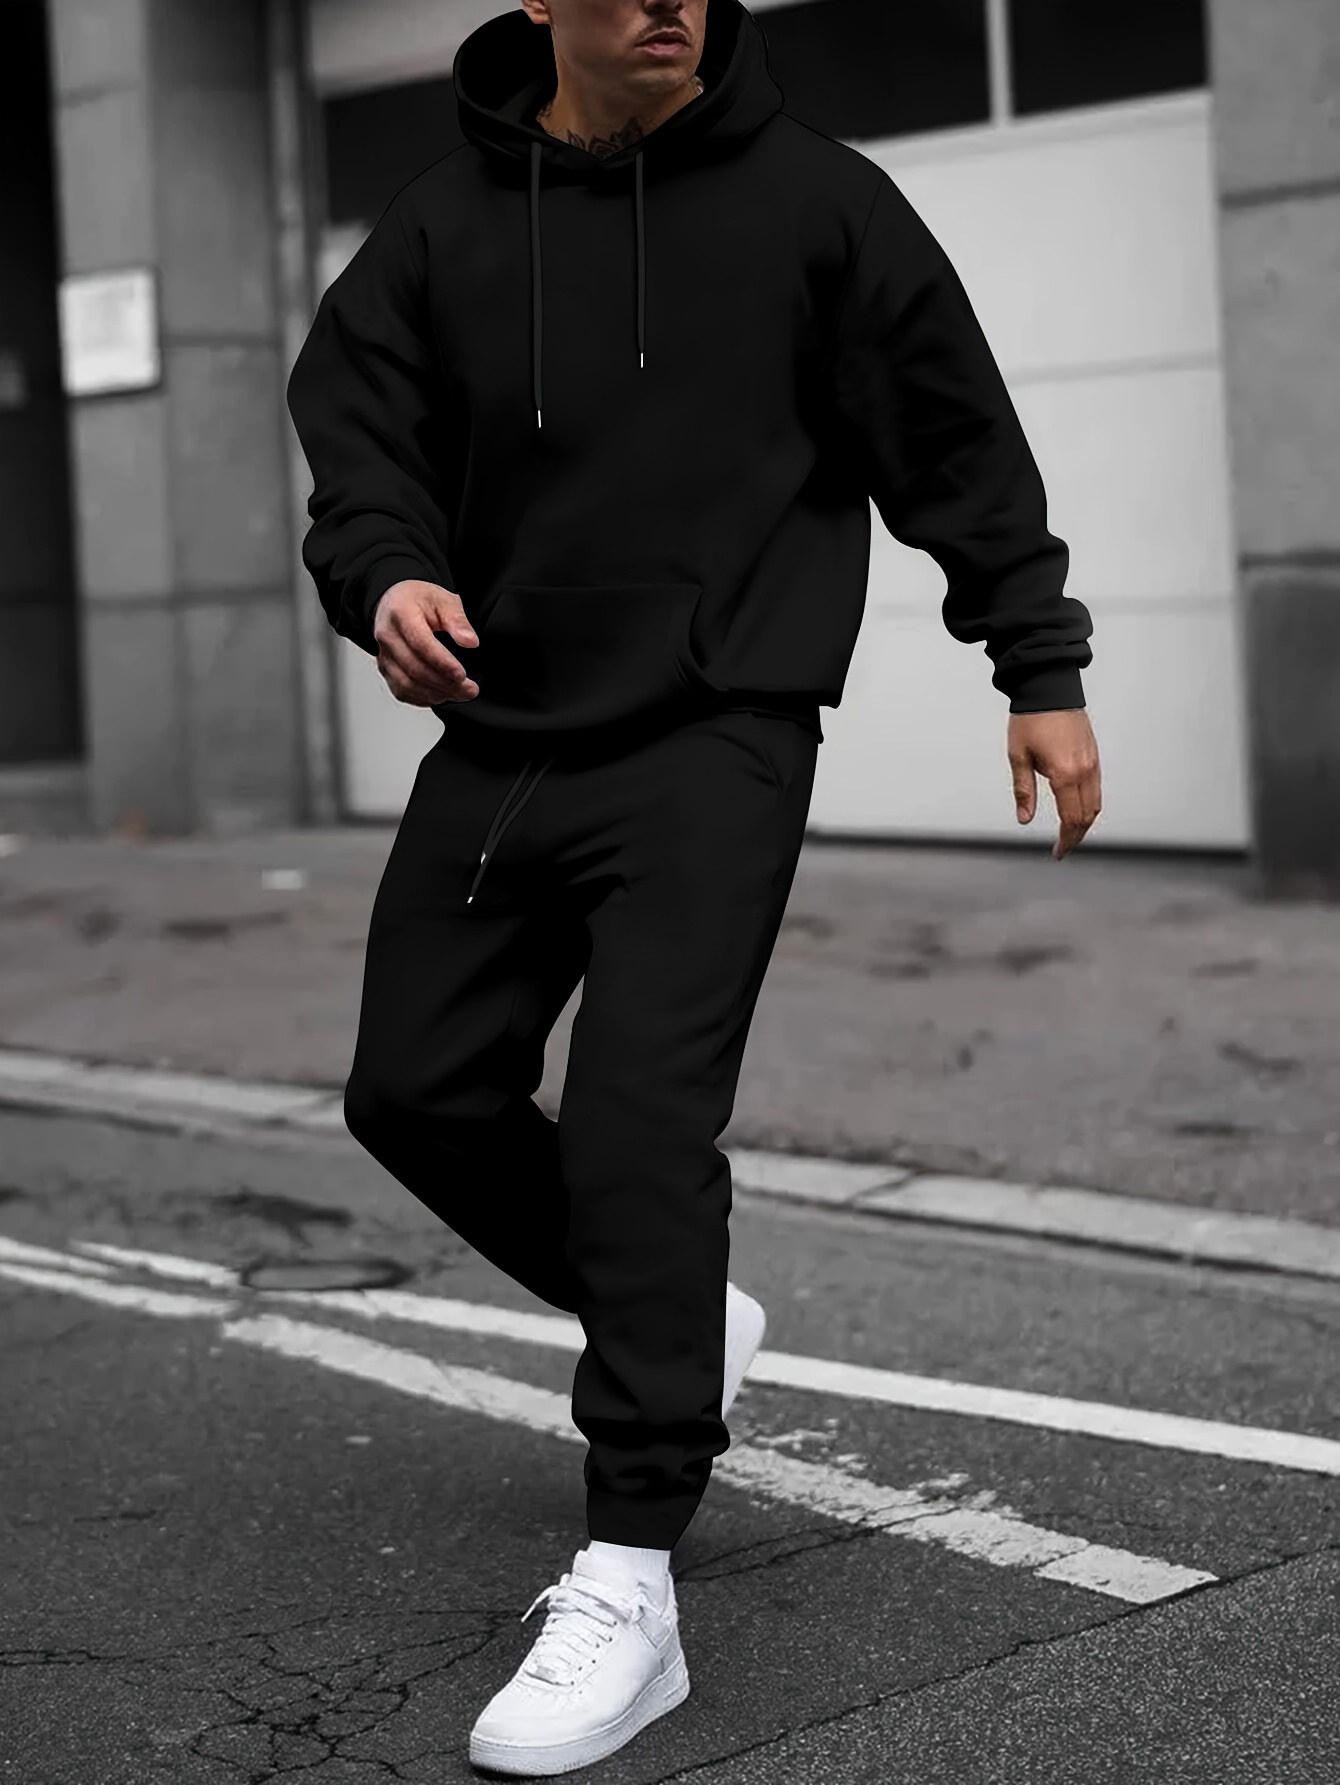 Black Hoodie with Sweatpants Outfits For Men (77 ideas & outfits